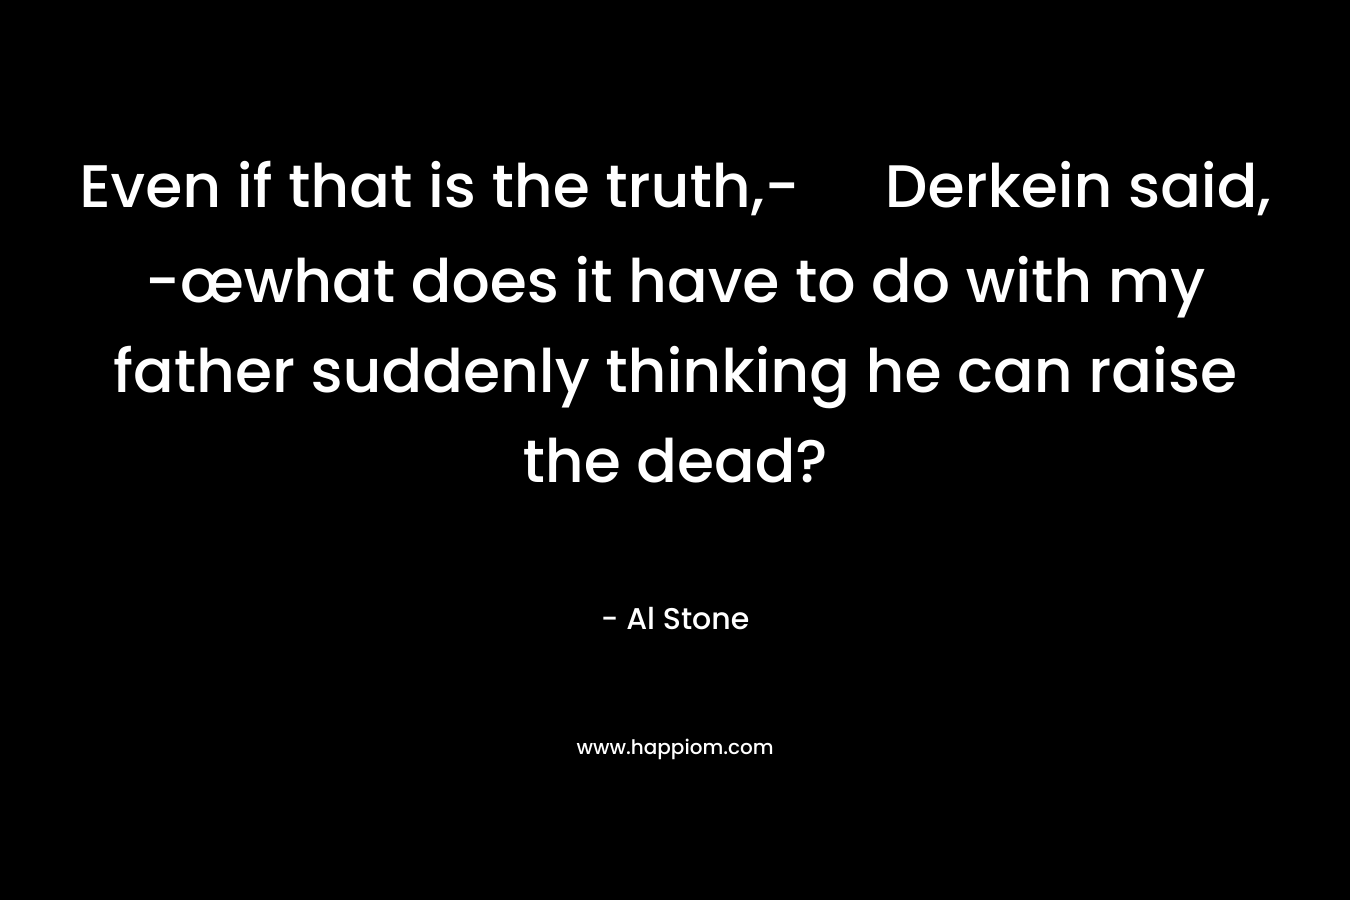 Even if that is the truth,- Derkein said, -œwhat does it have to do with my father suddenly thinking he can raise the dead?